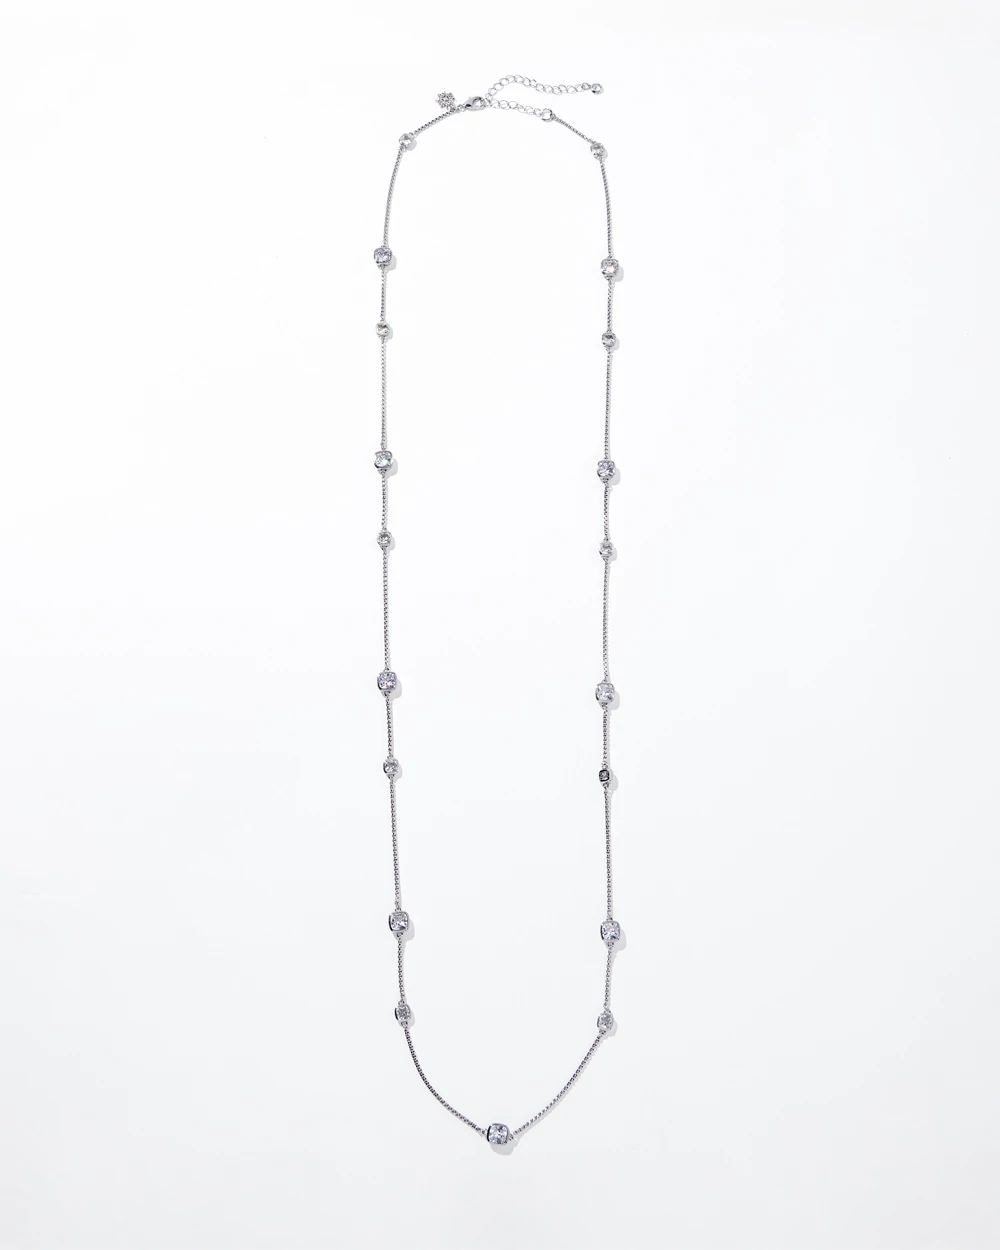 Silver Clear Branded Long Necklace click to view larger image.